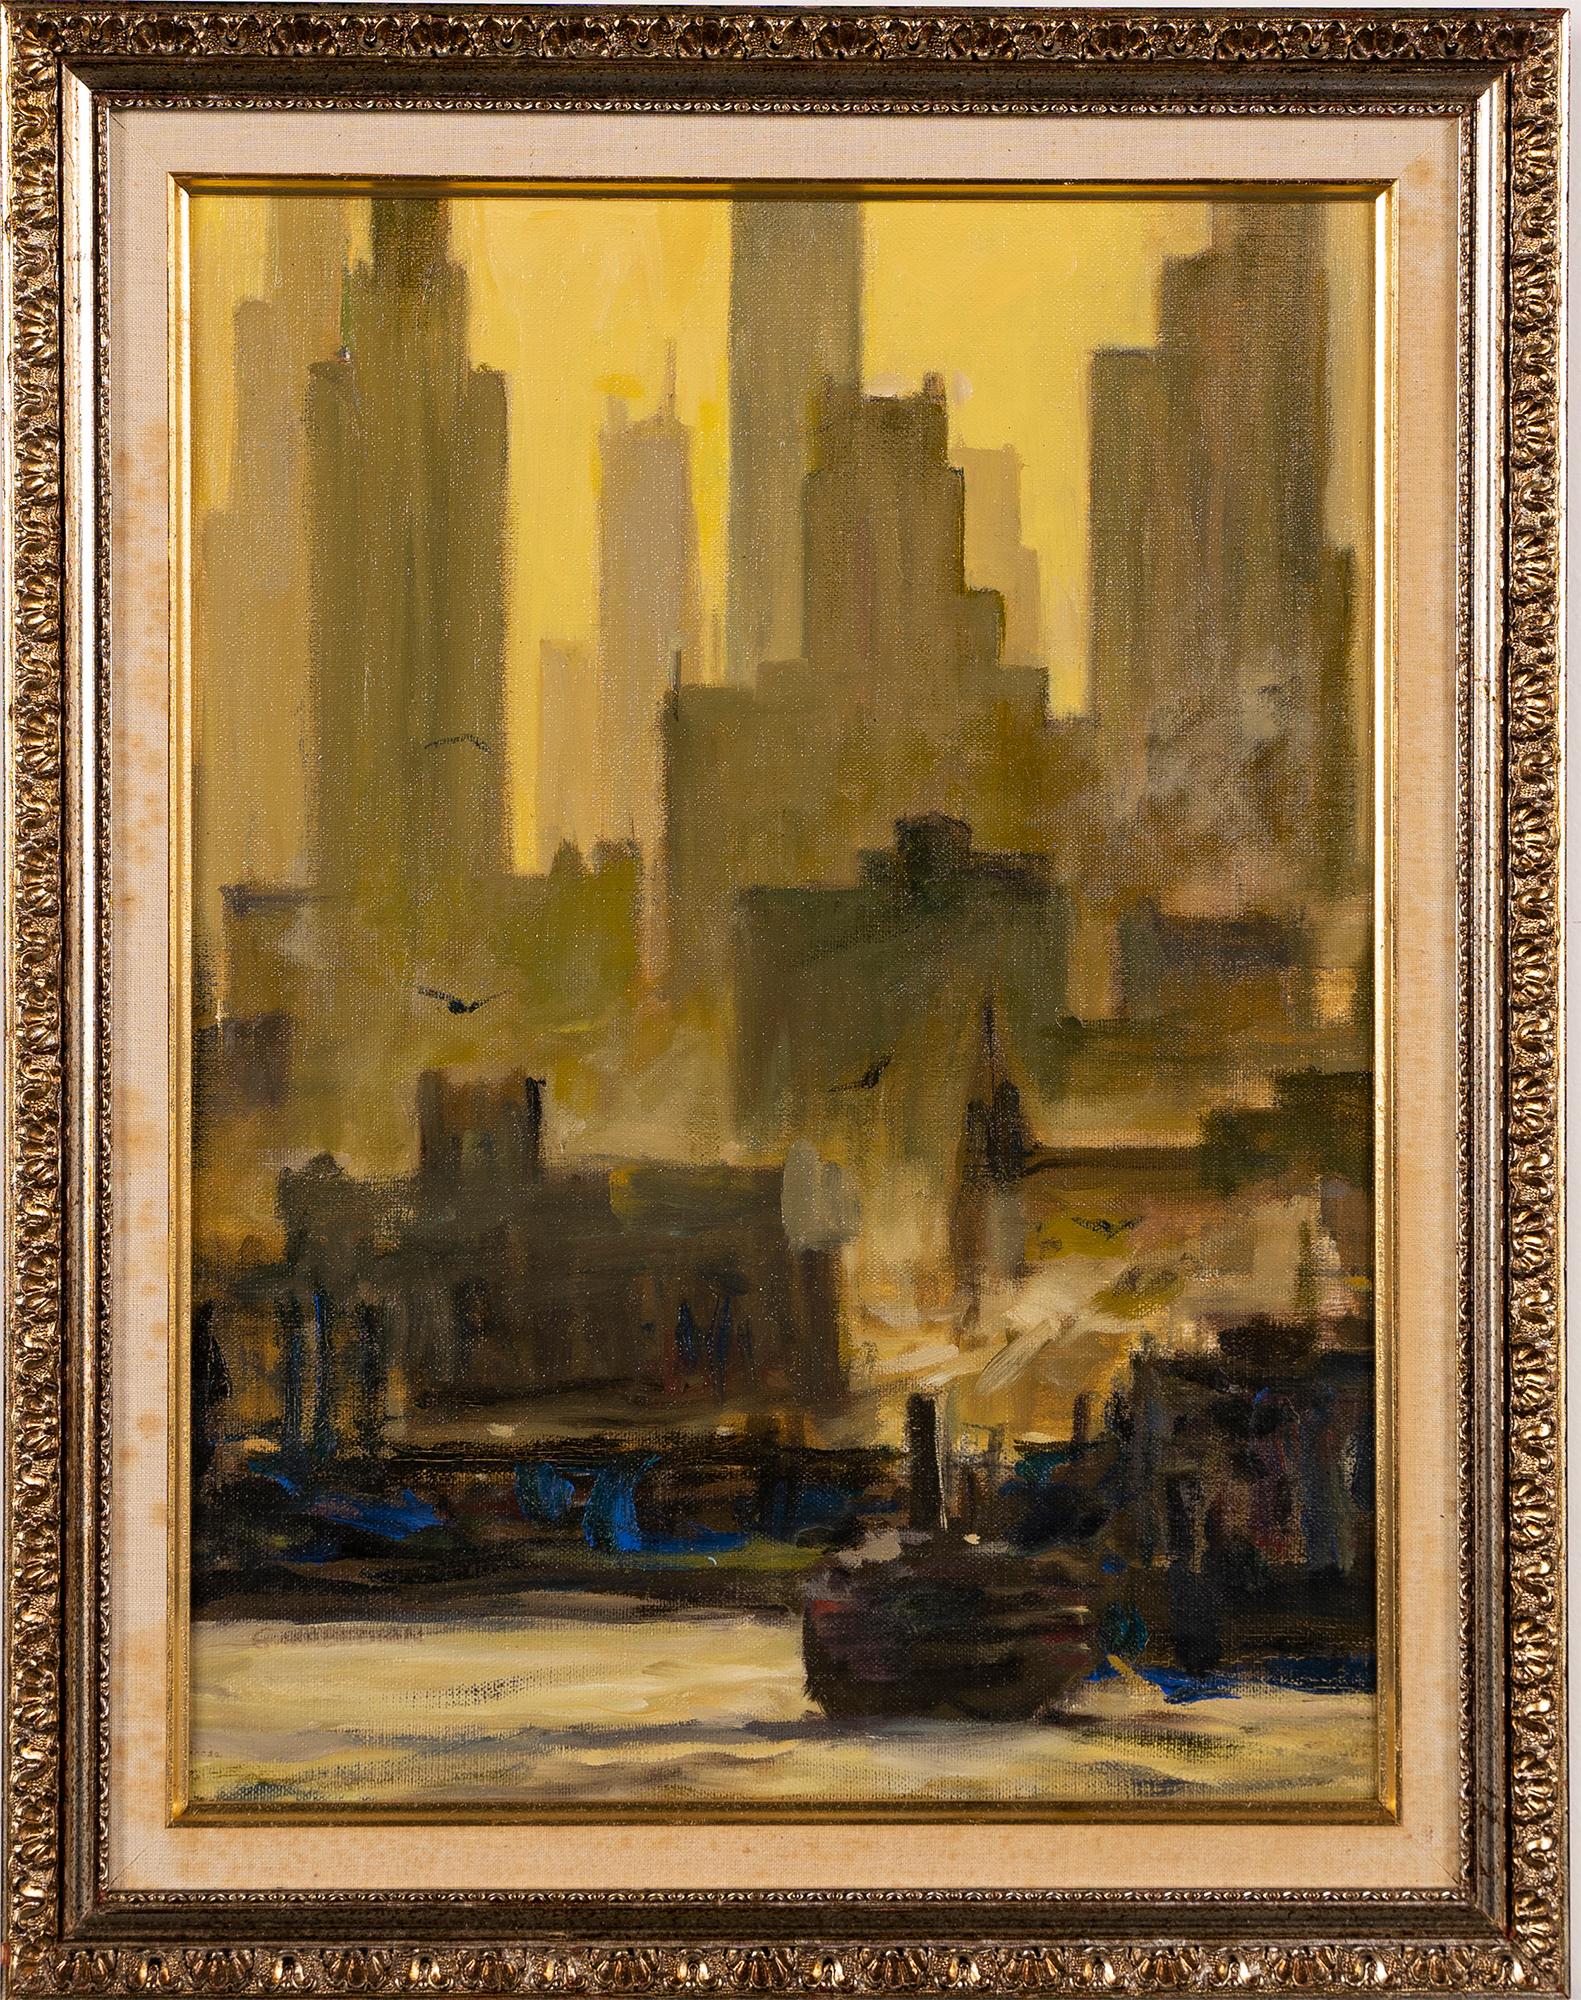 Antique American Modernist New York City Downtown Harbor Boat View Oil Painting - Brown Landscape Painting by Unknown